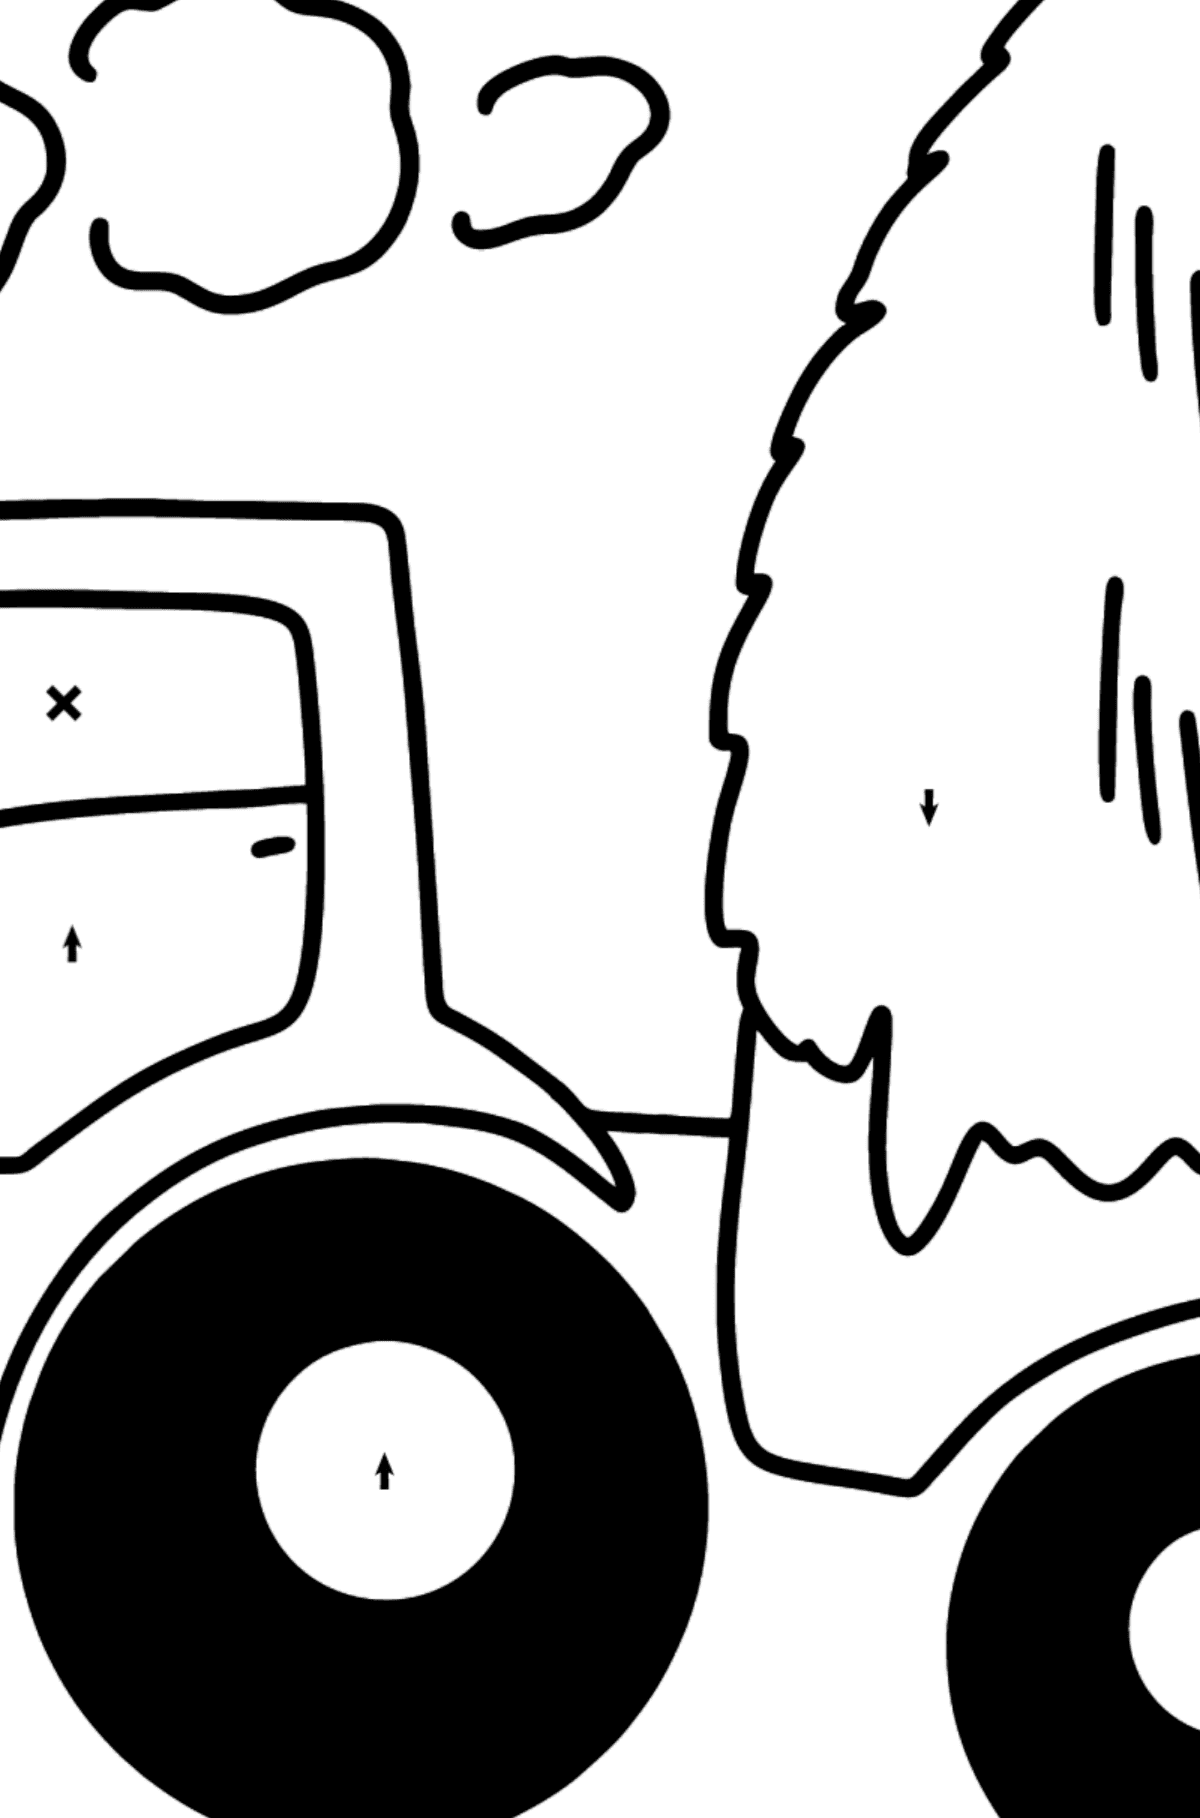 Tractor with Hay coloring page - Coloring by Symbols and Geometric Shapes for Kids